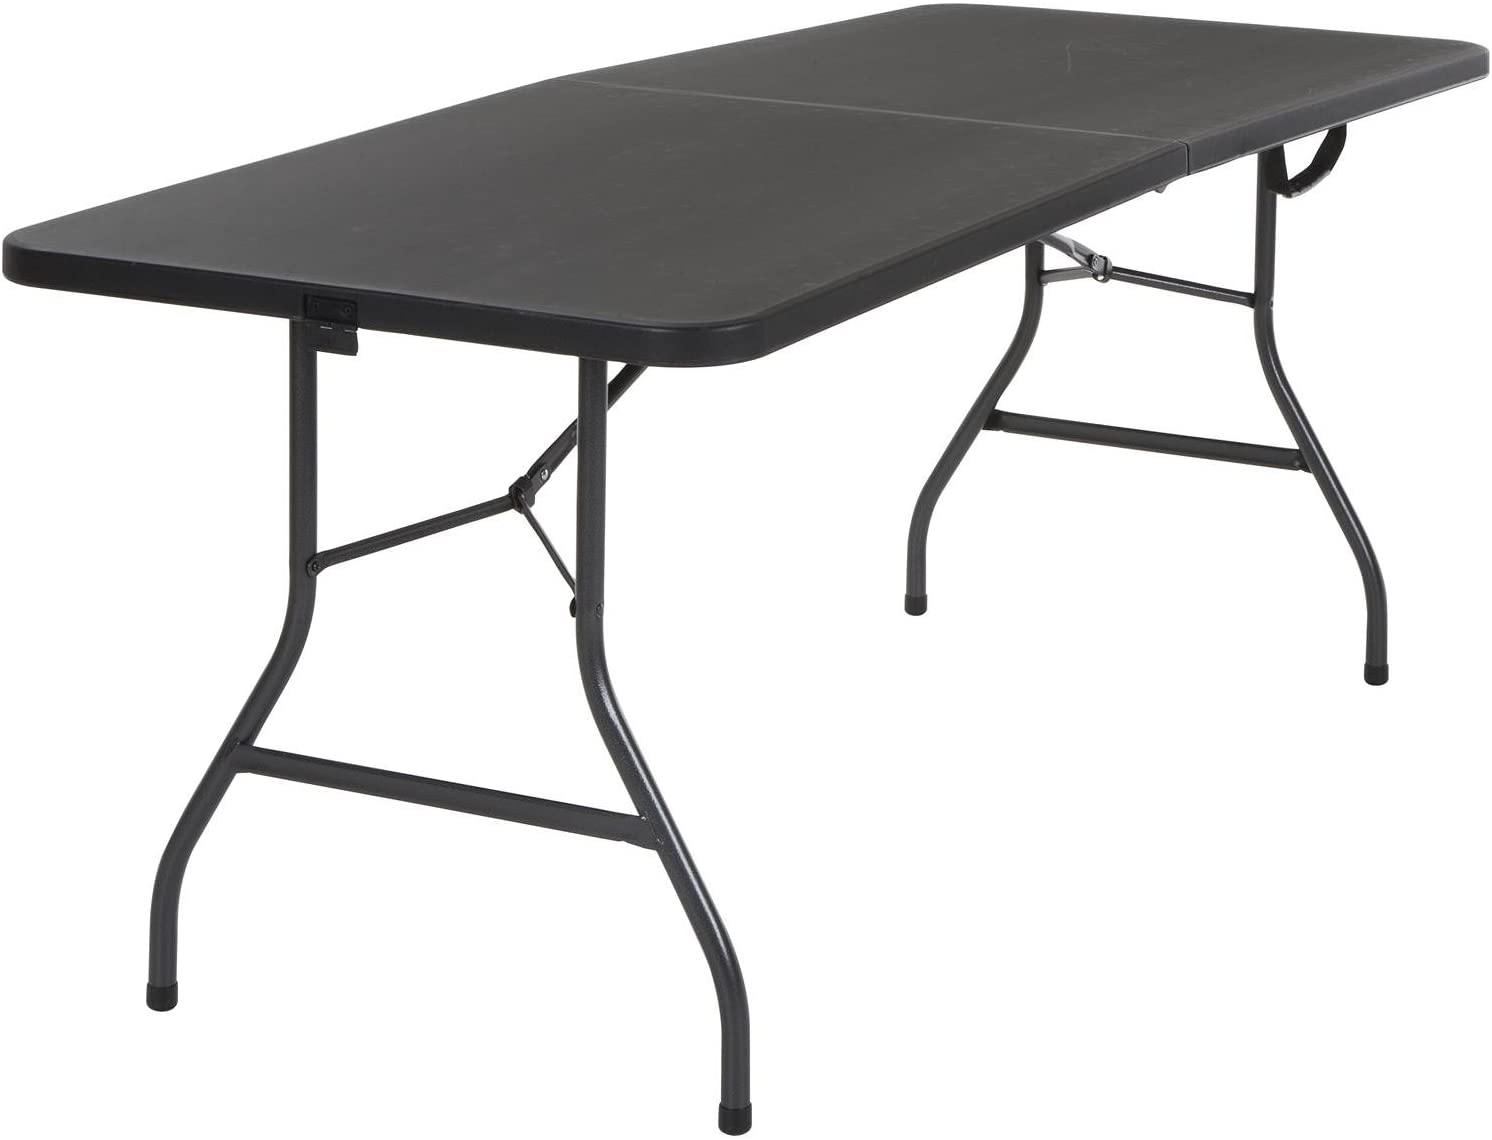 Photo 1 of COSCO Deluxe 6 foot x 30 inch FoldinHalf Blow Molded Folding Table Black